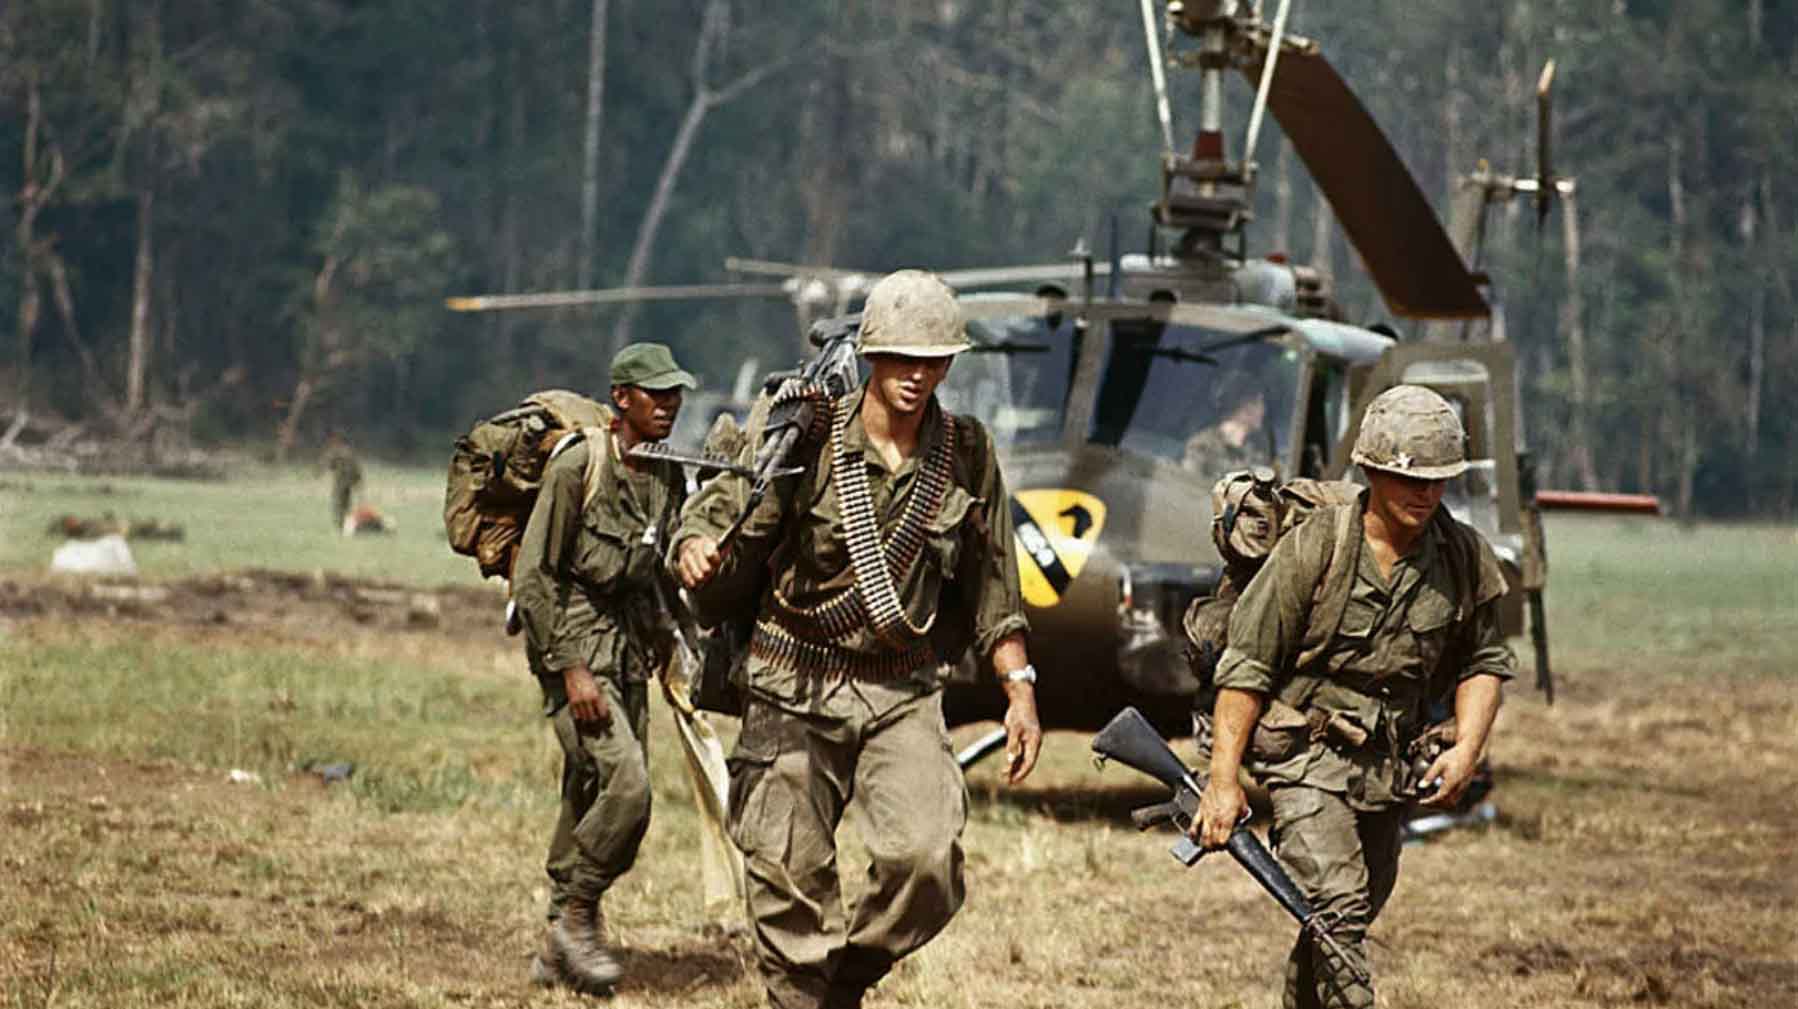 Soldiers from the Vietnam War carrying weapons in front of a helicopter